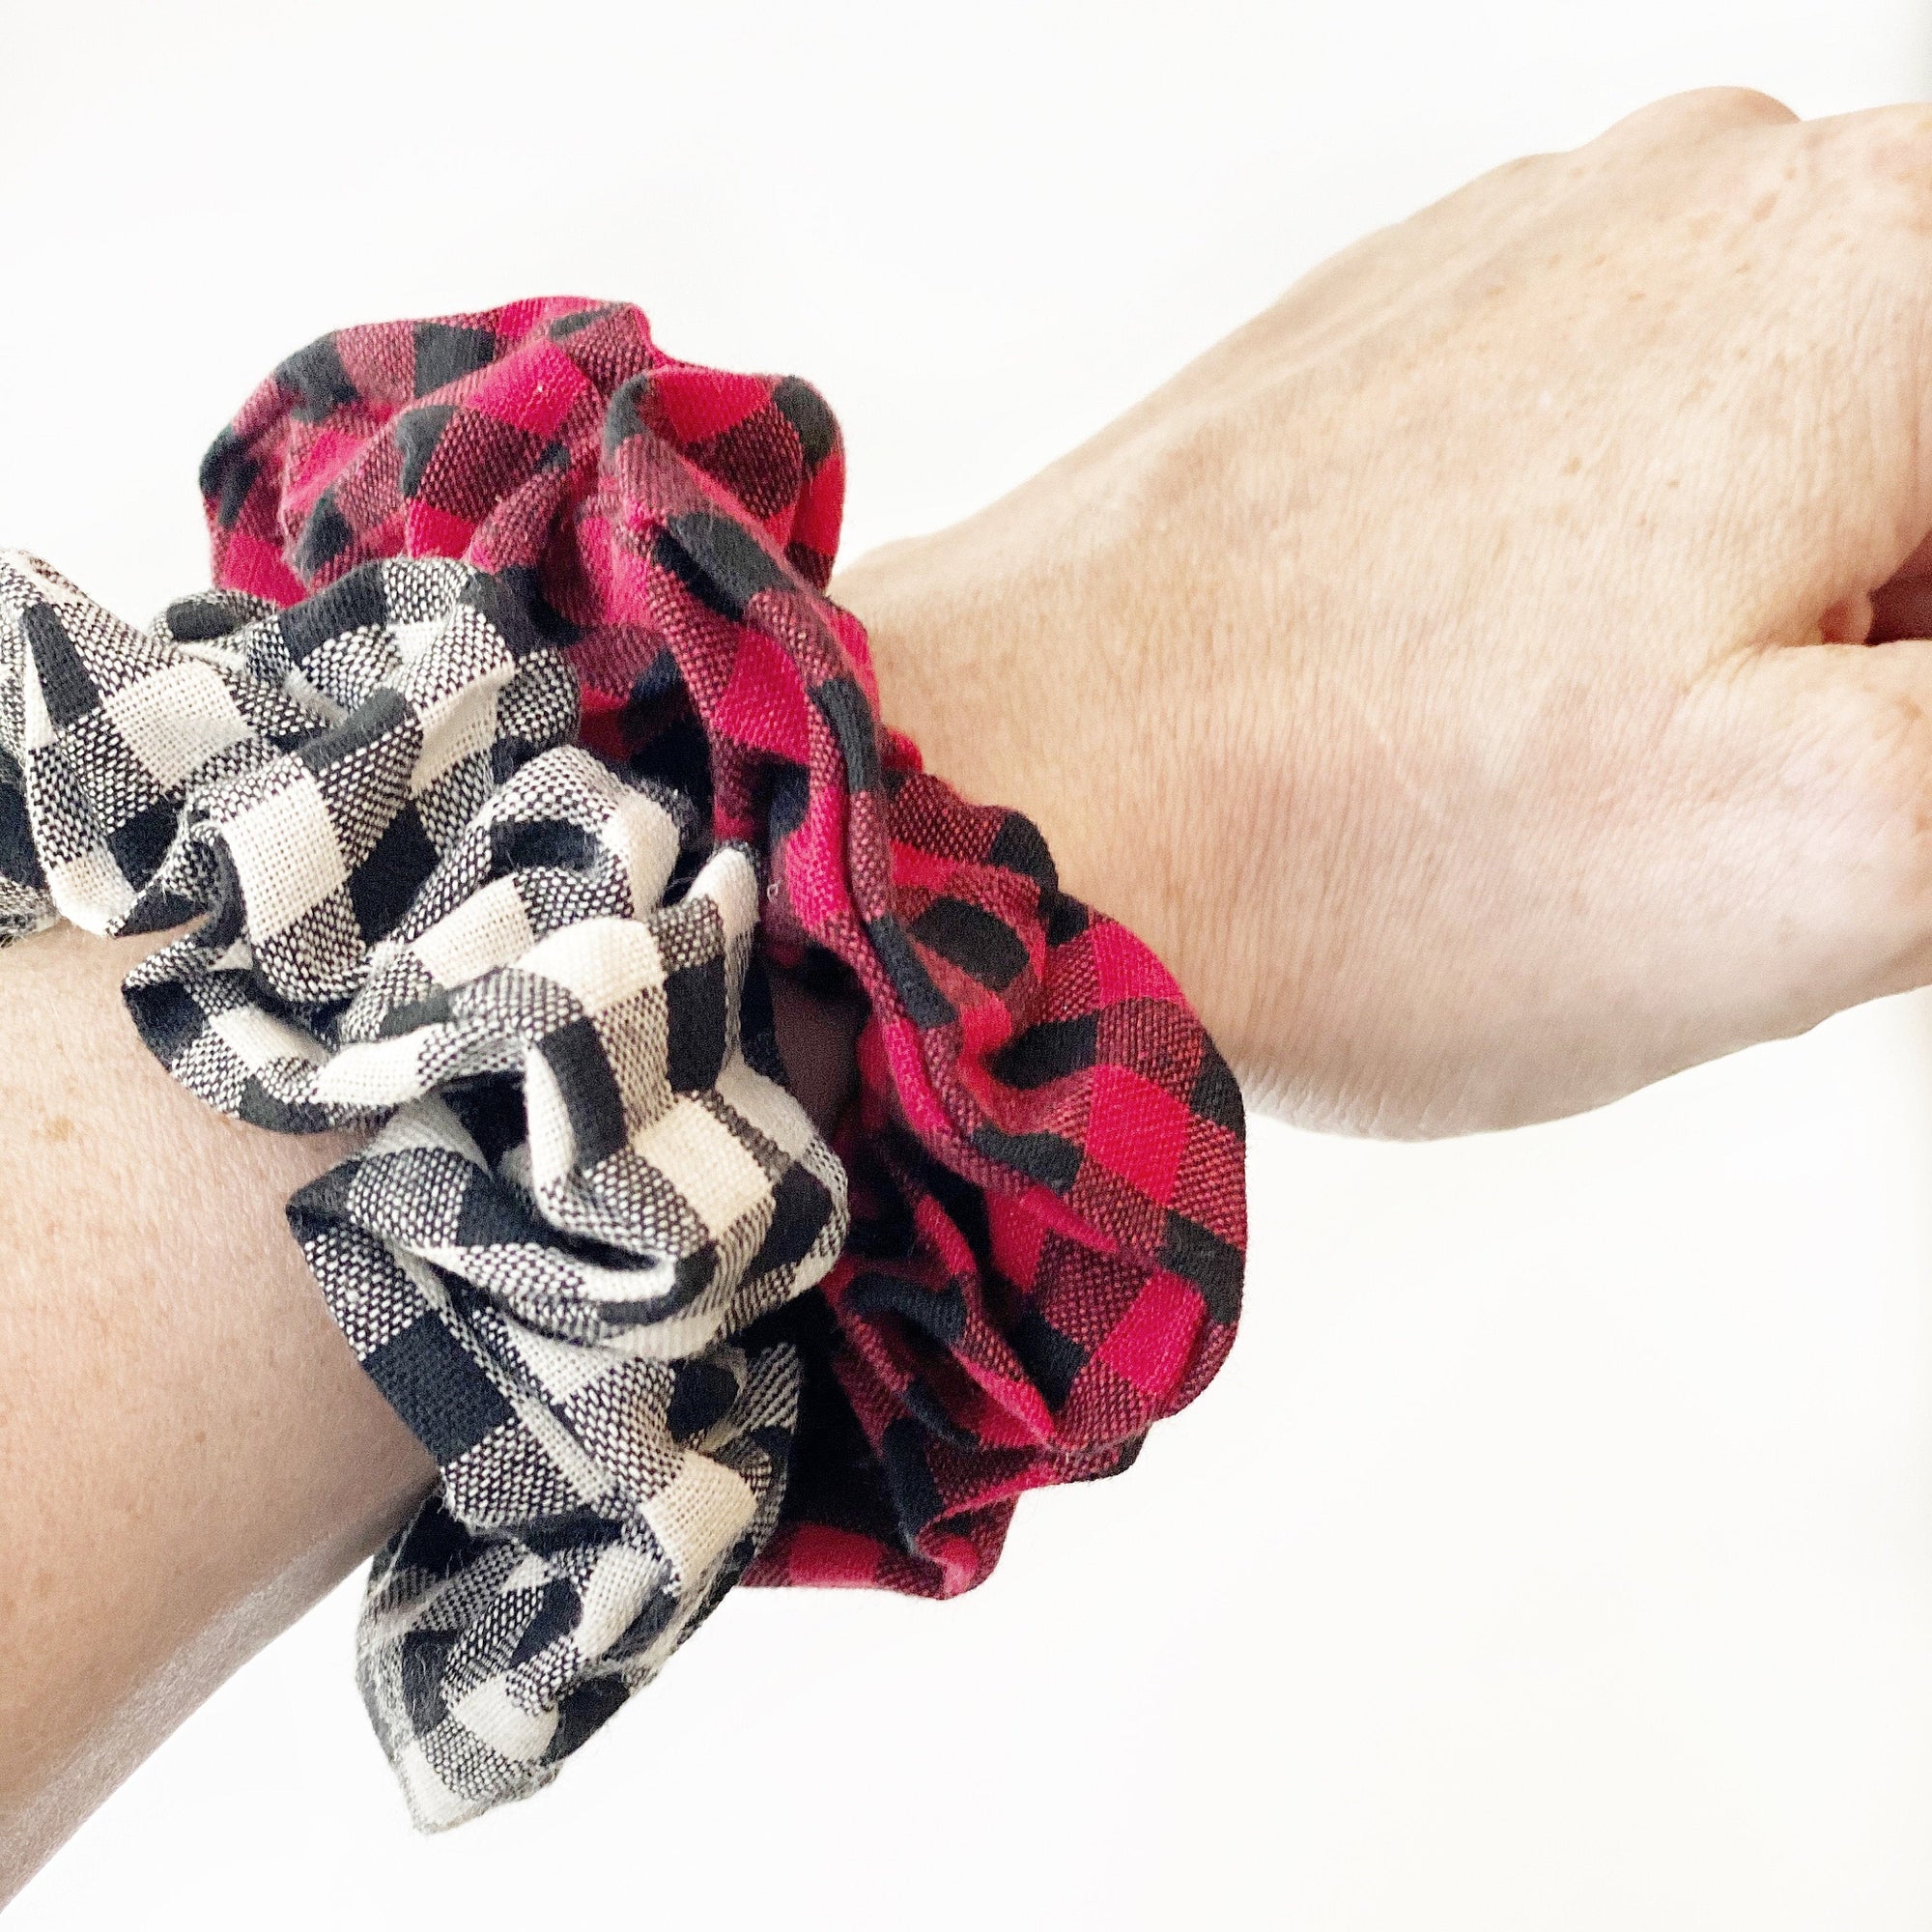 Camping Hair Don't Care, Buffalo Plaid Camping Birthday Party Favors, Glamping Hair Scrunchie